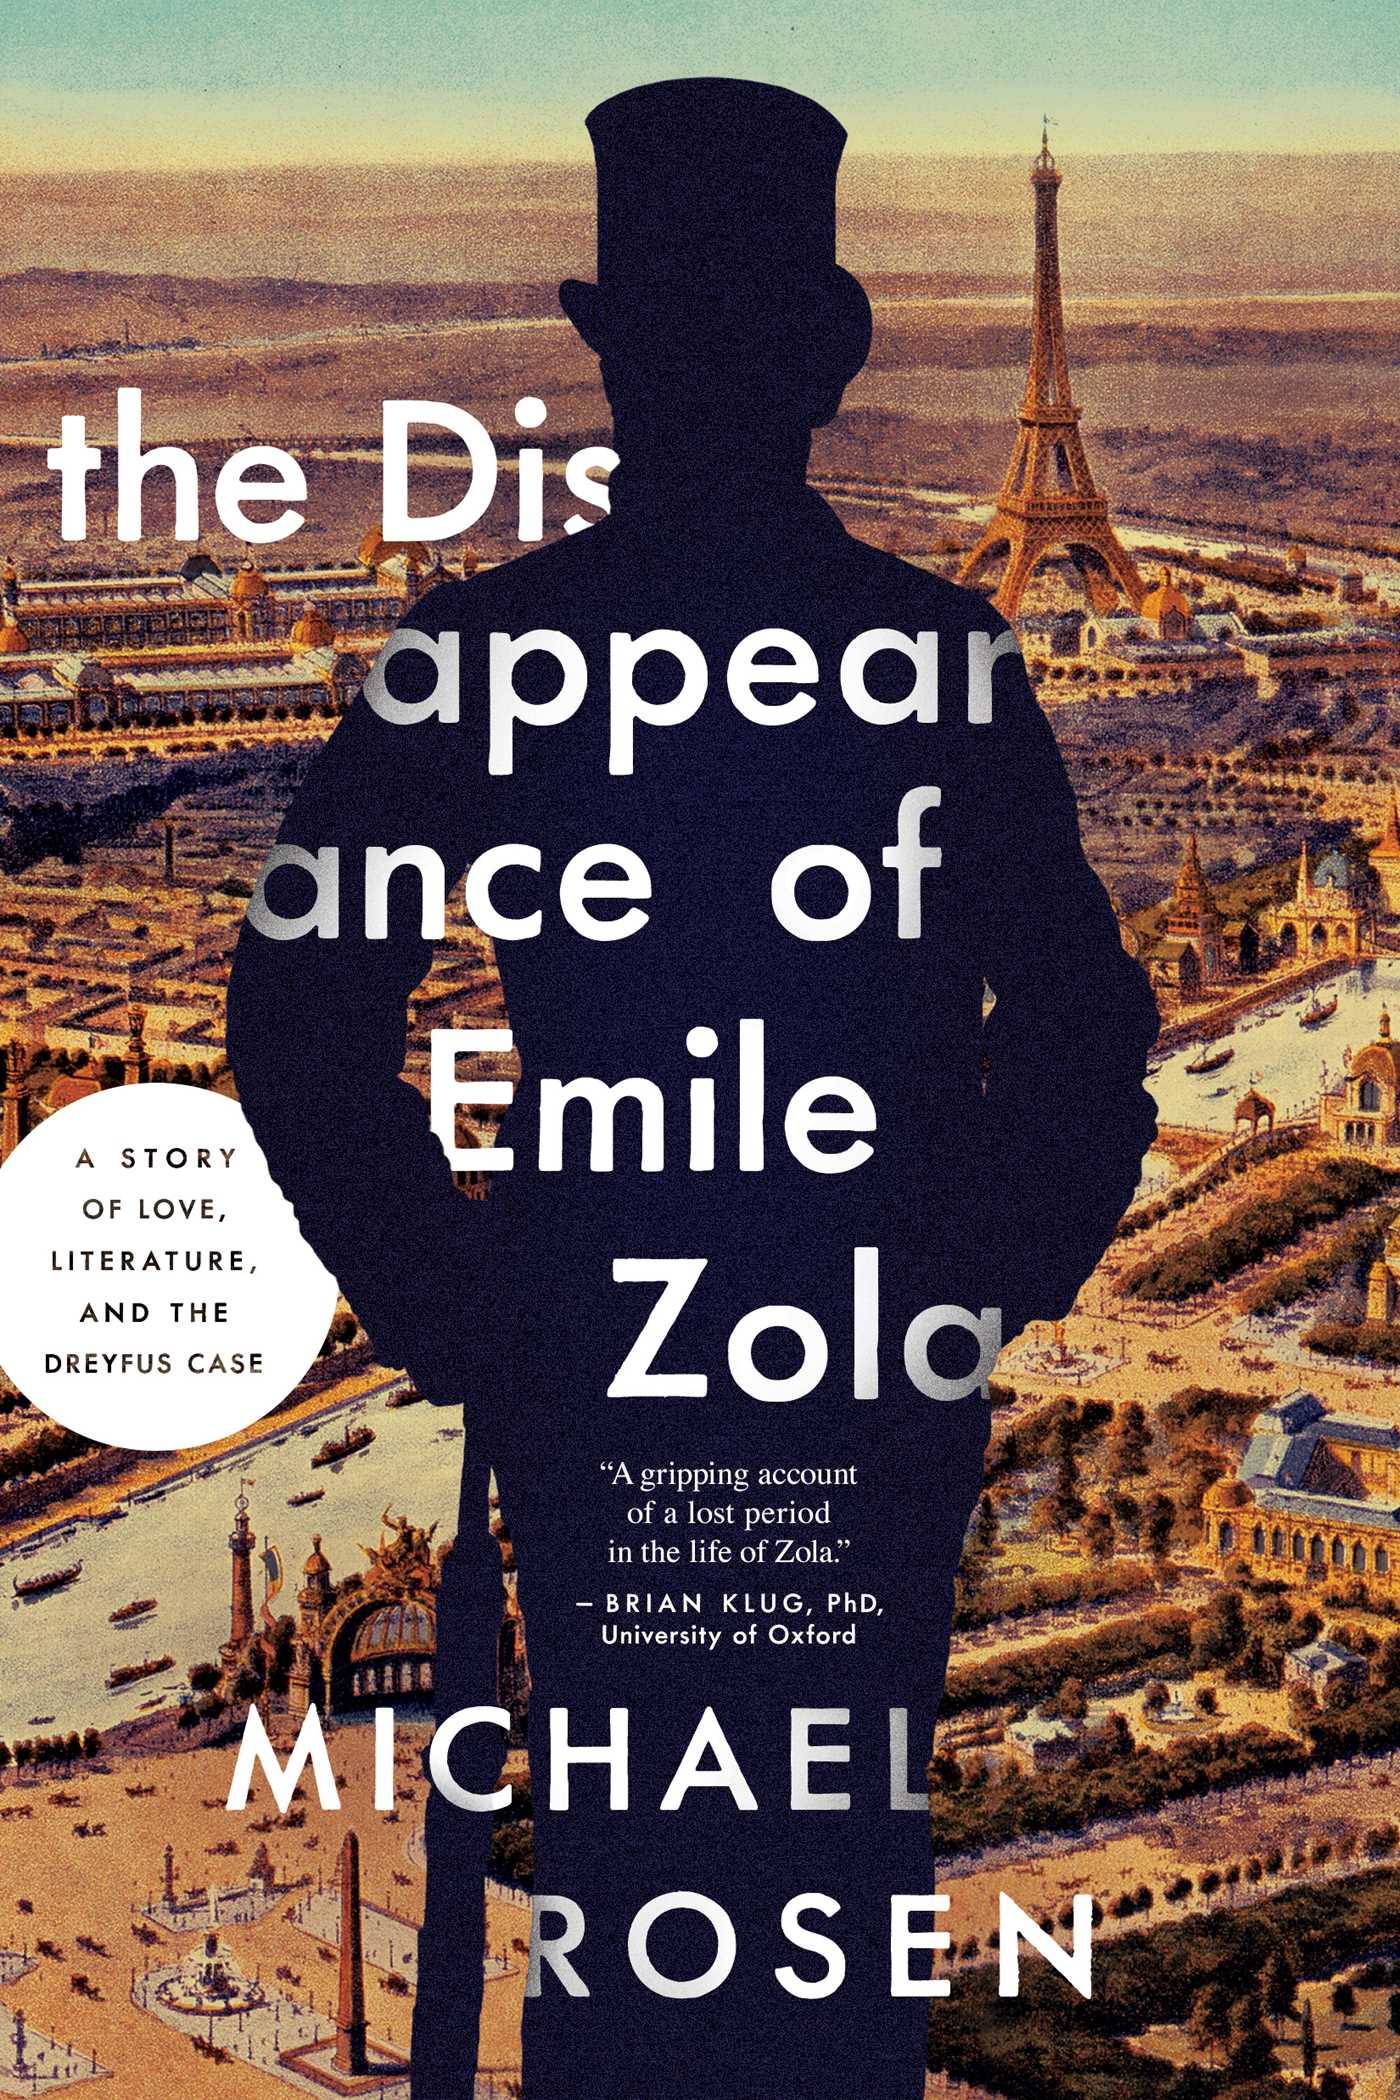 The Disappearance of Émile Zola by Michael Rosen